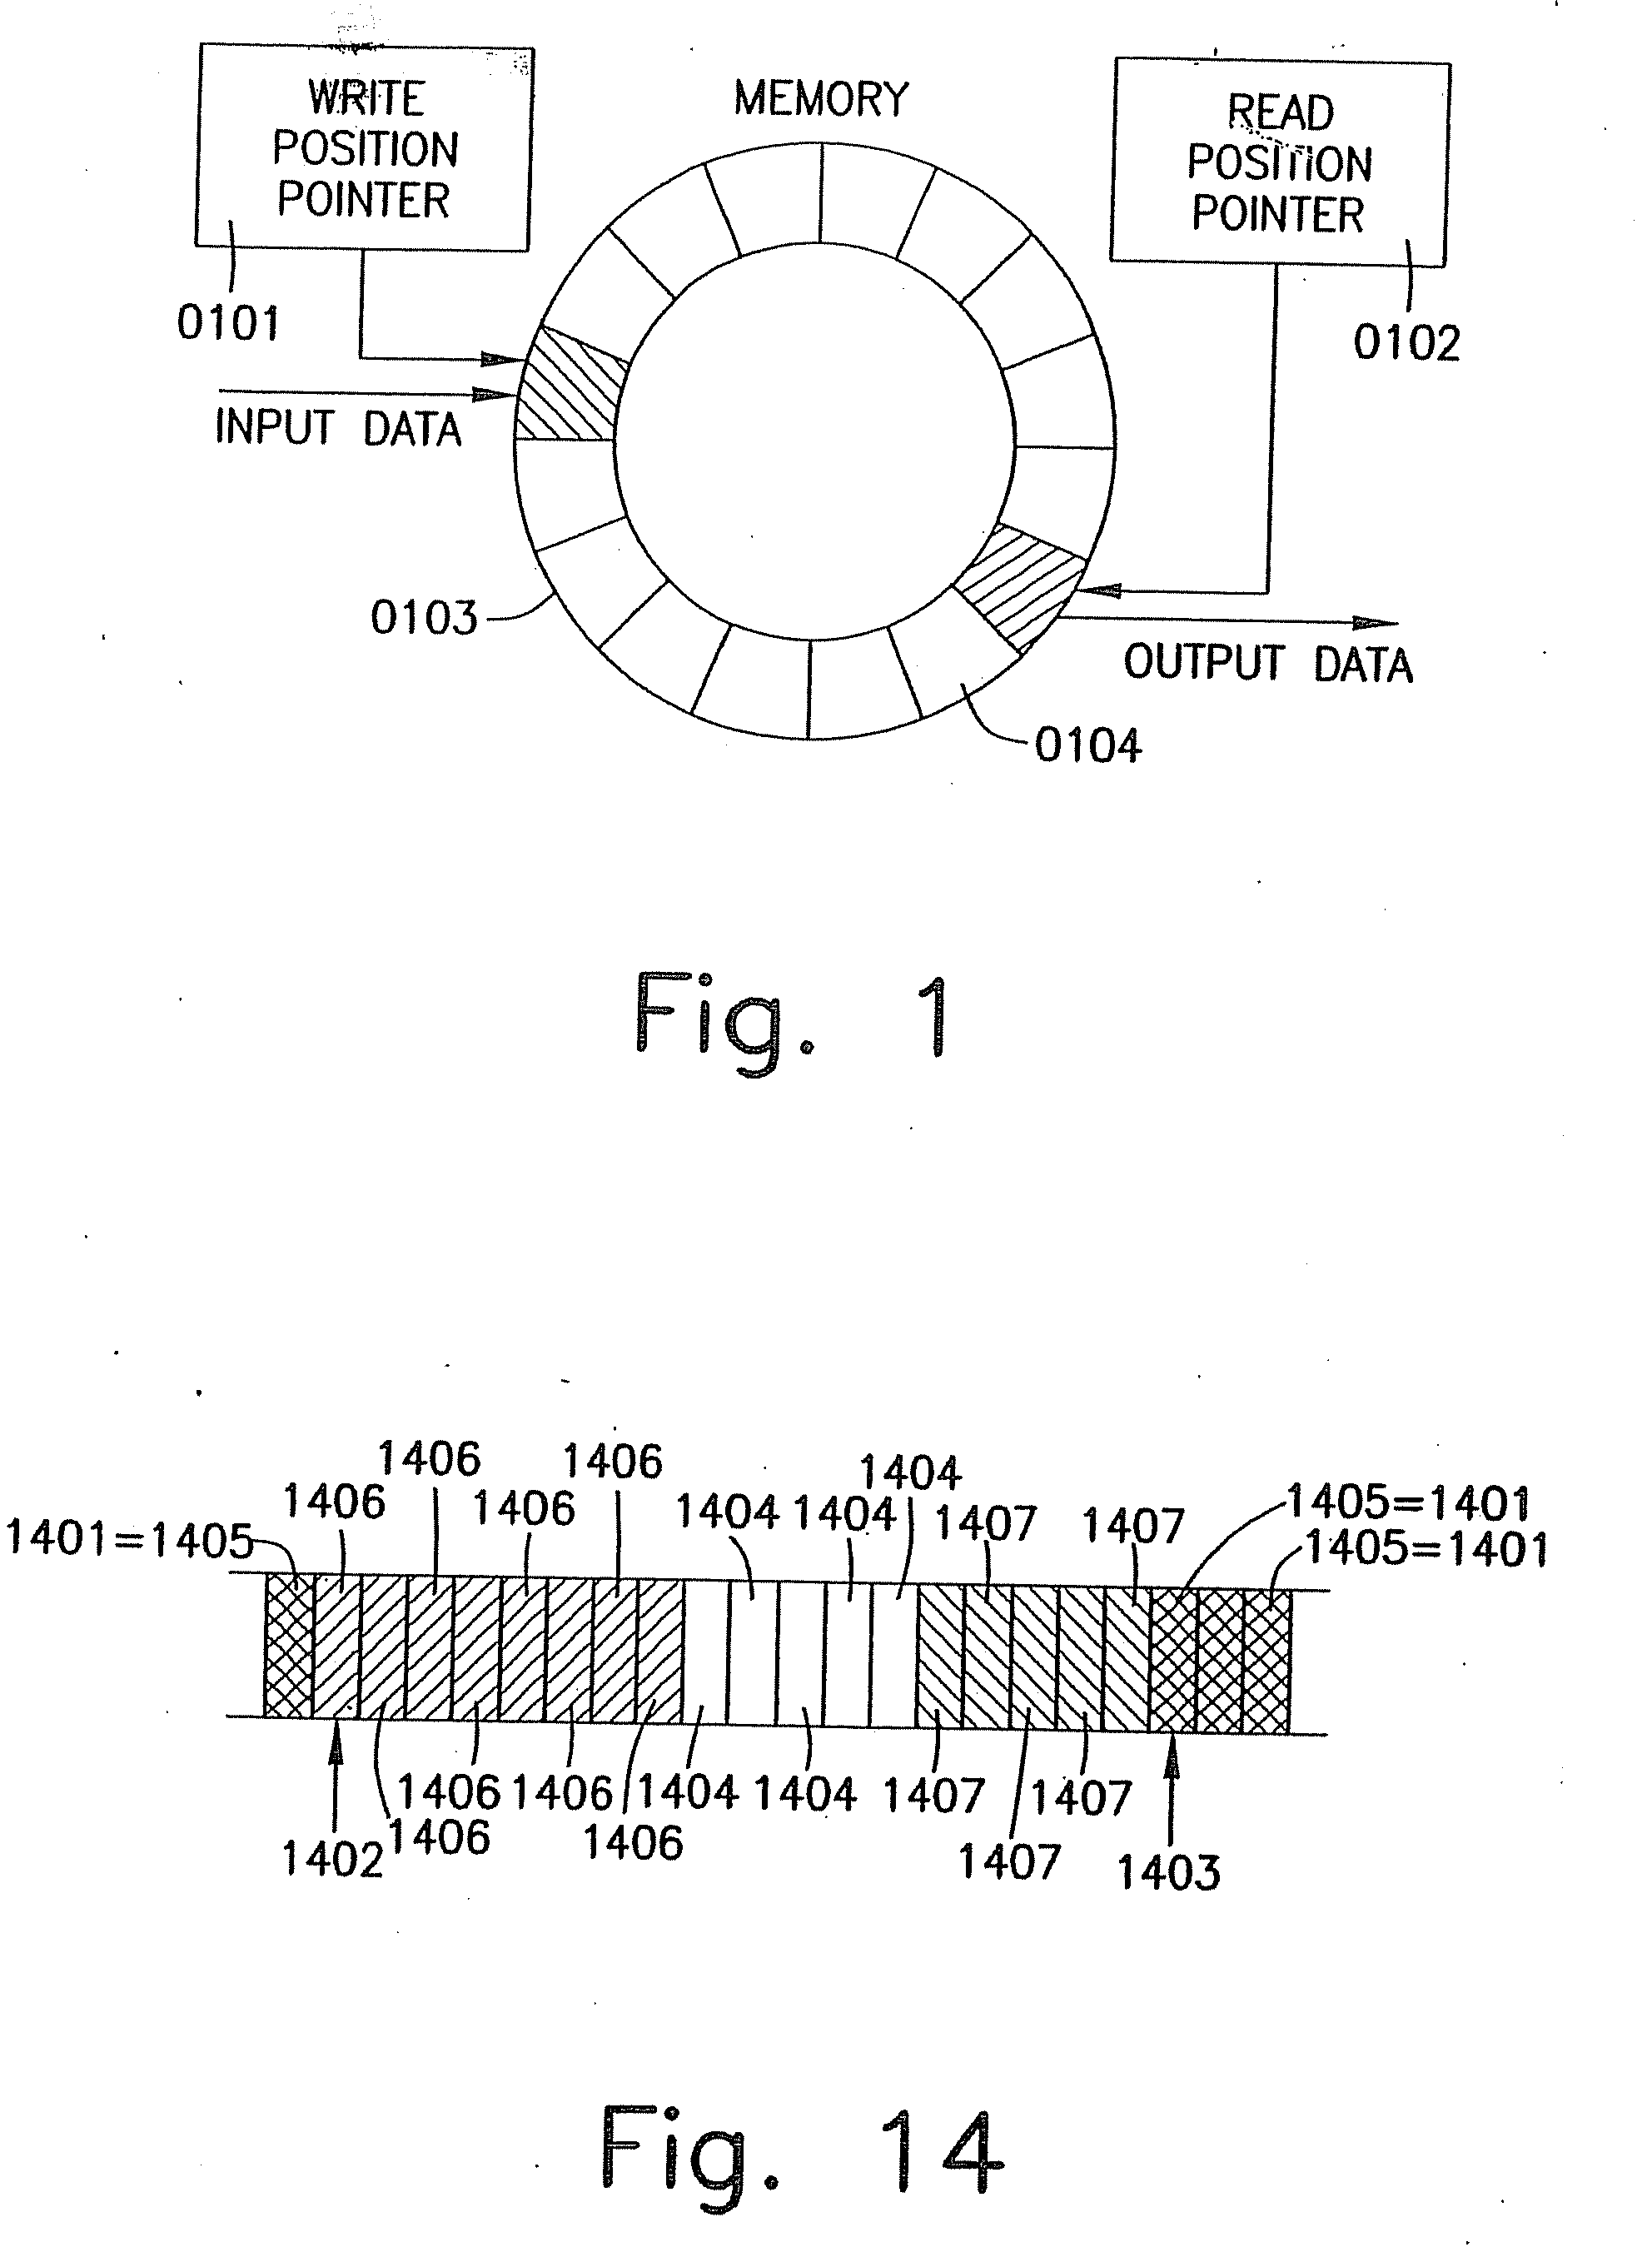 PROCESS FOR AUTOMATIC DYNAMIC RELOADING OF DATA FLOW PROCESSORS (DFPs) AND UNITS WITH TWO- OR THREE-DIMENSIONAL PROGRAMMABLE CELL ARCHITECTURES (FPGAs, DPGAs AND THE LIKE)